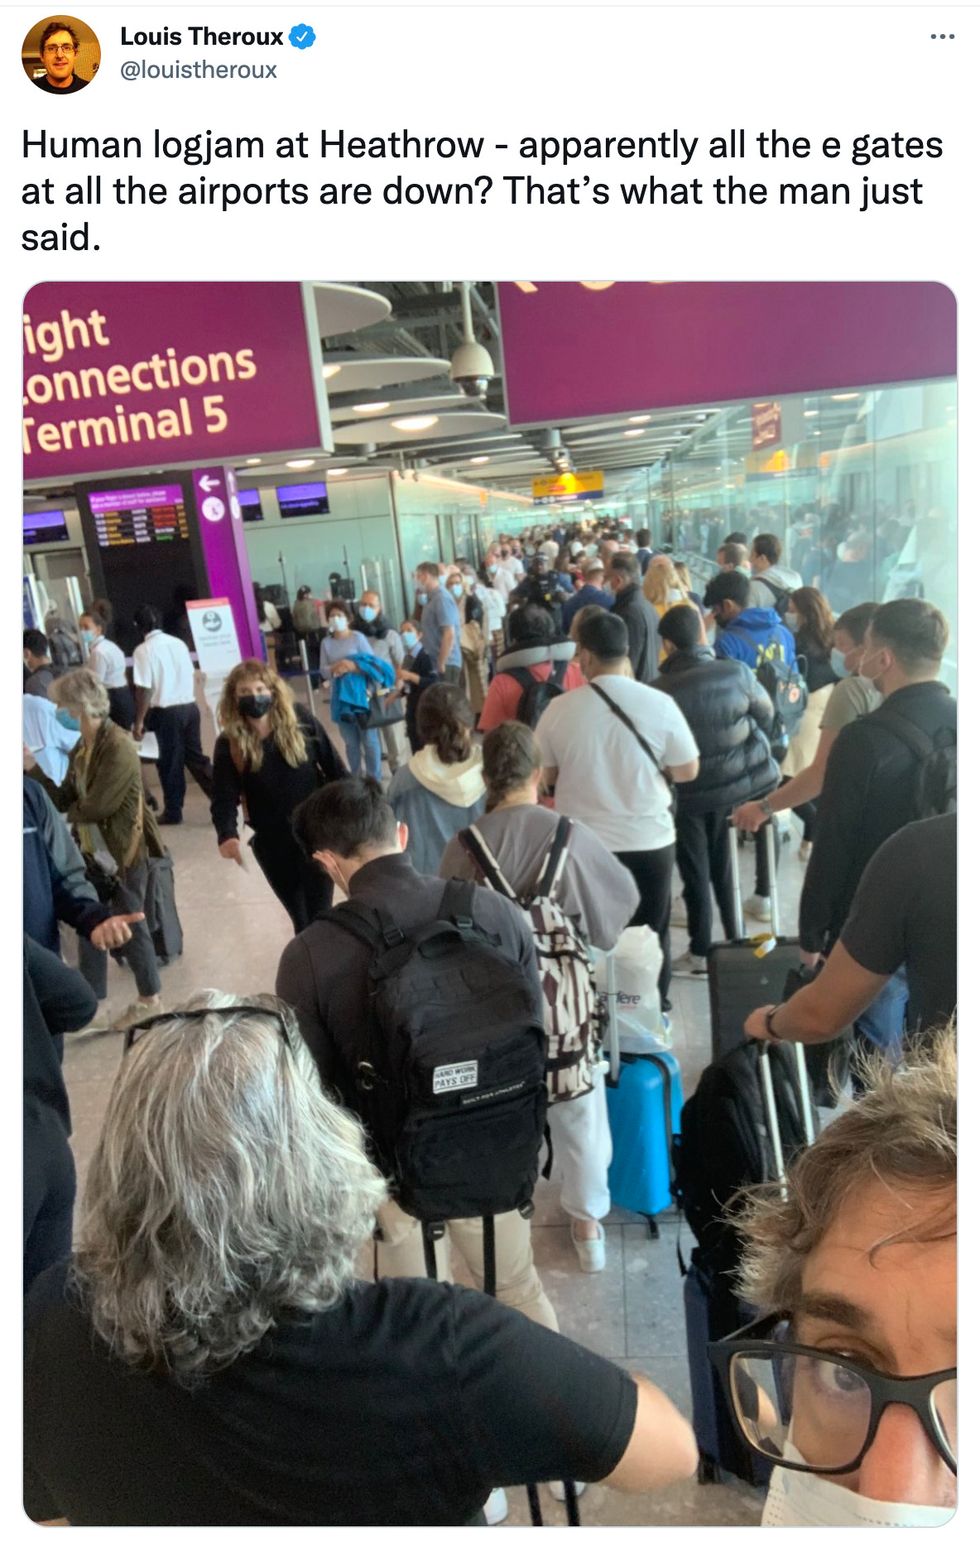 Louis Theroux is in the 'human logjam' at Heathrow